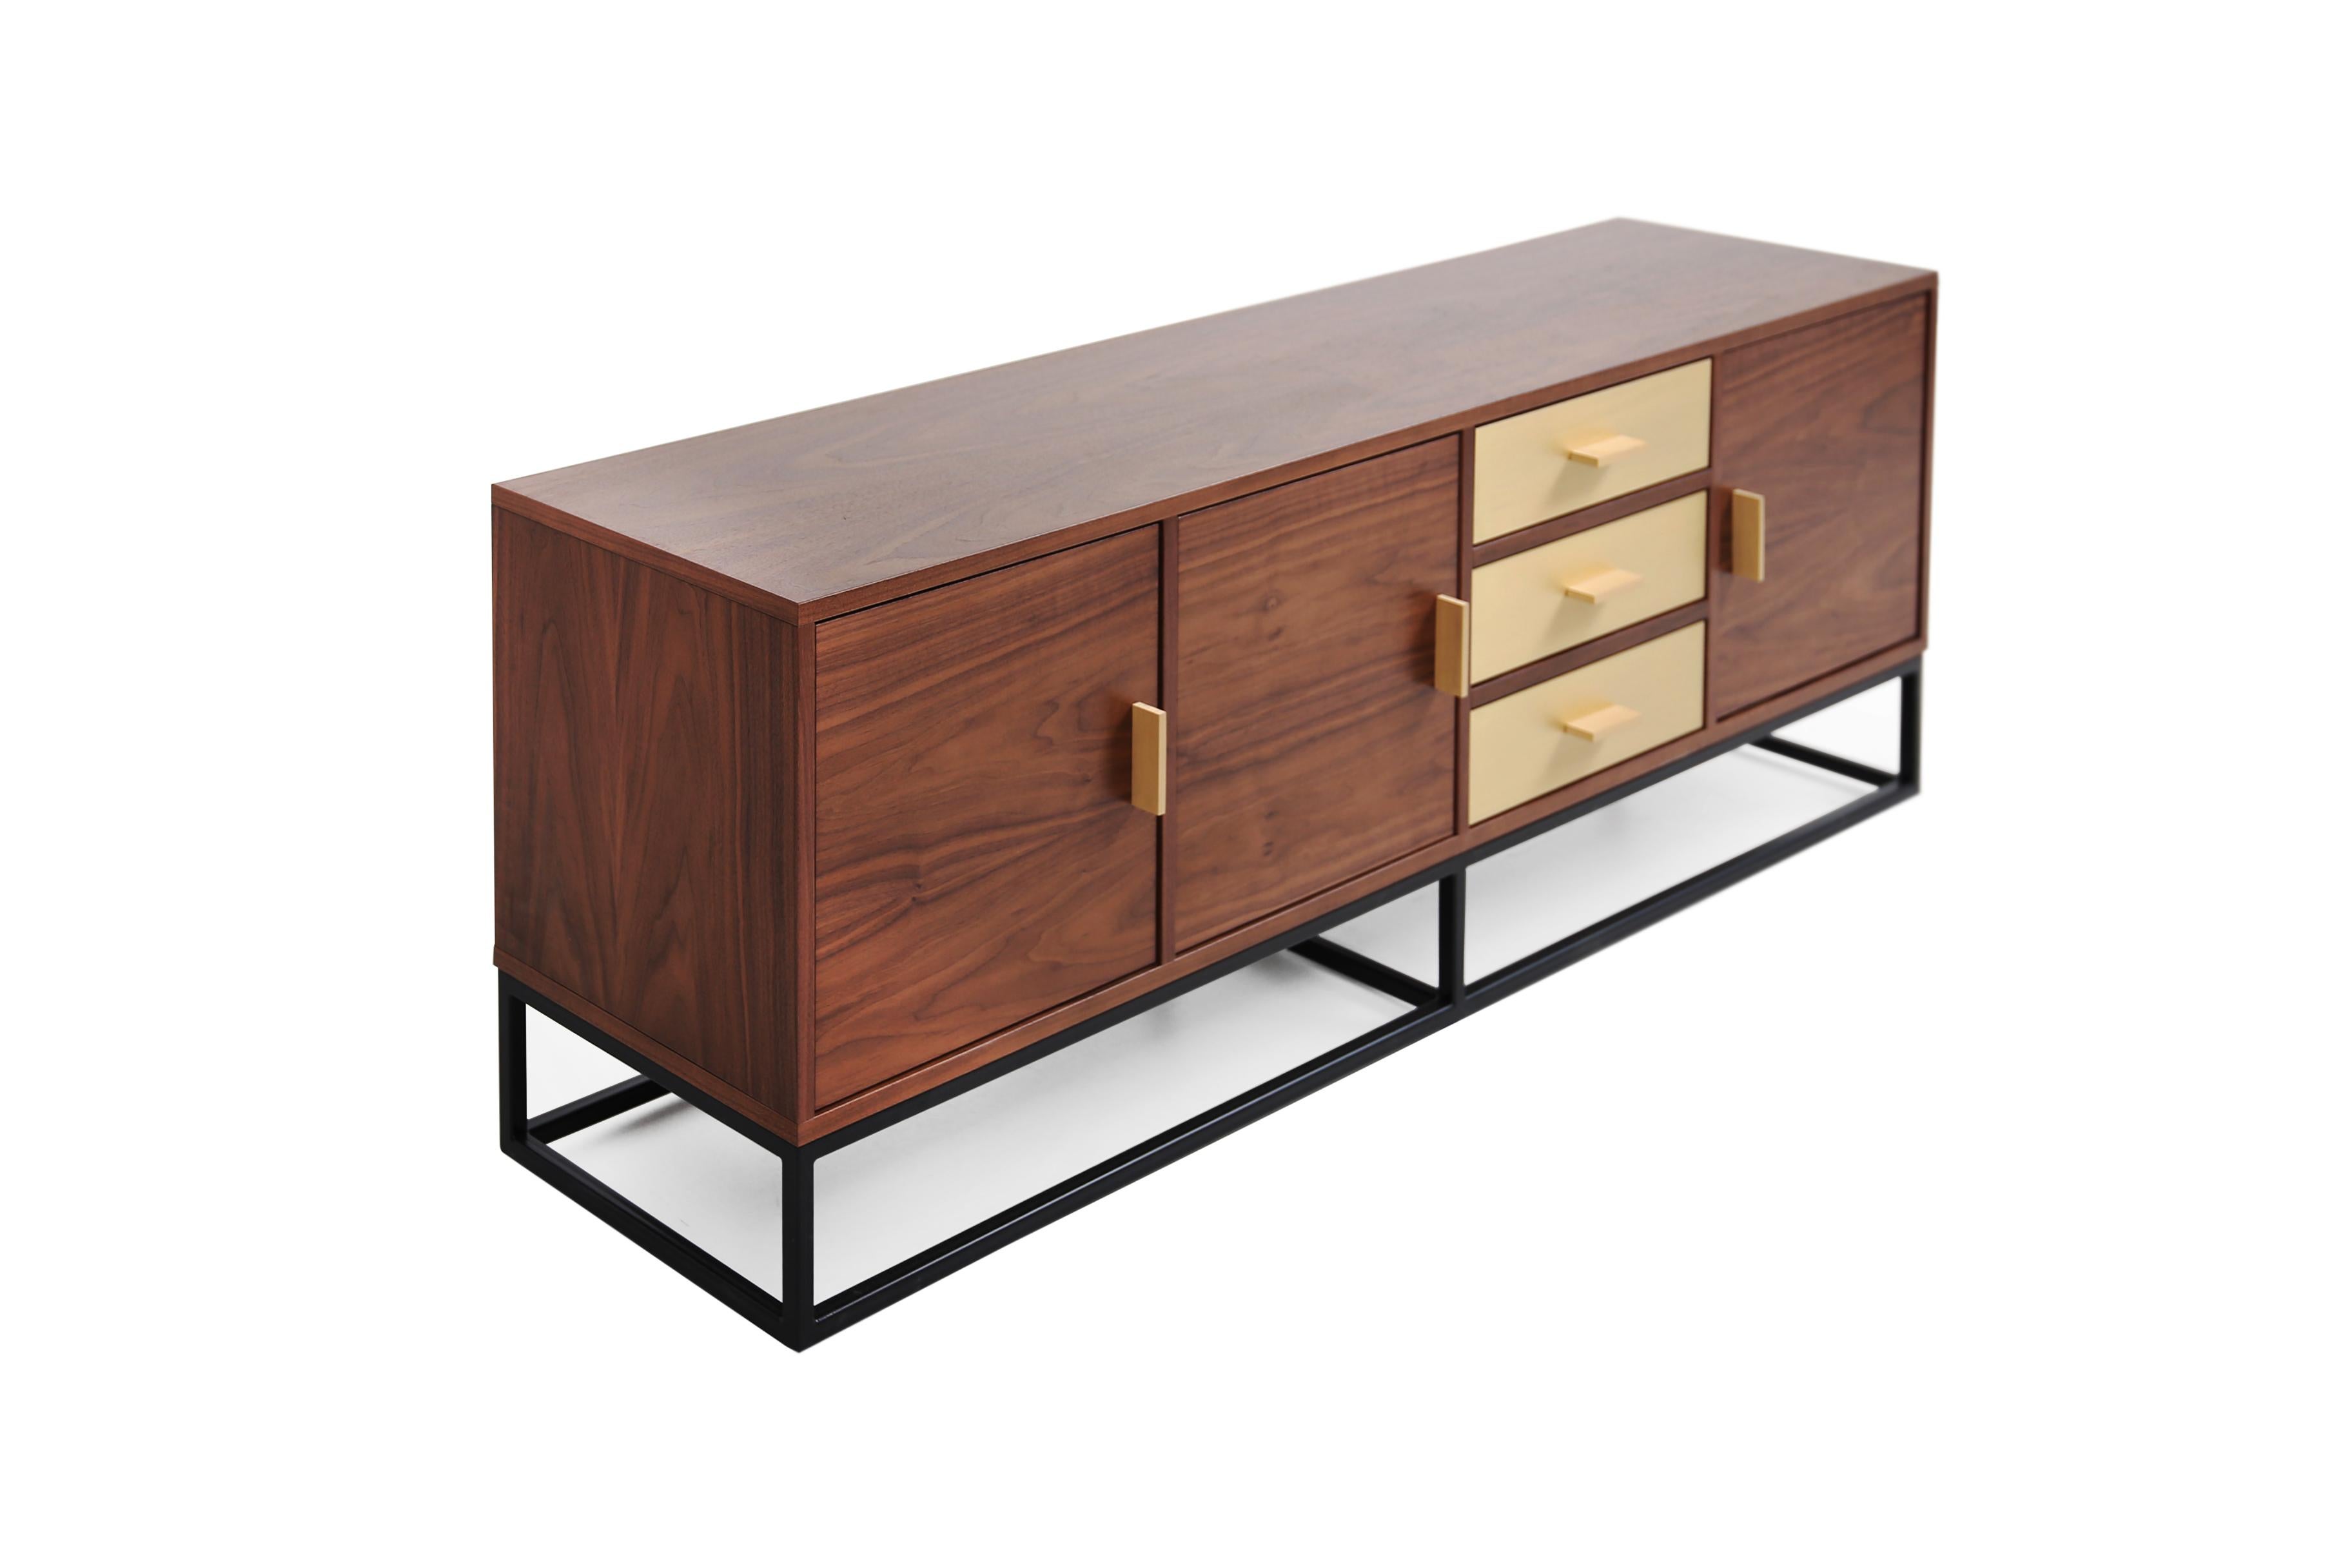 Introducing the perfect blend of timeless elegance and practicality - our stunning sideboard Reykjavik with a midcentury feel. Crafted from premium walnut veneers, brushed brass and black steel legs, this piece is a true statement of sophistication